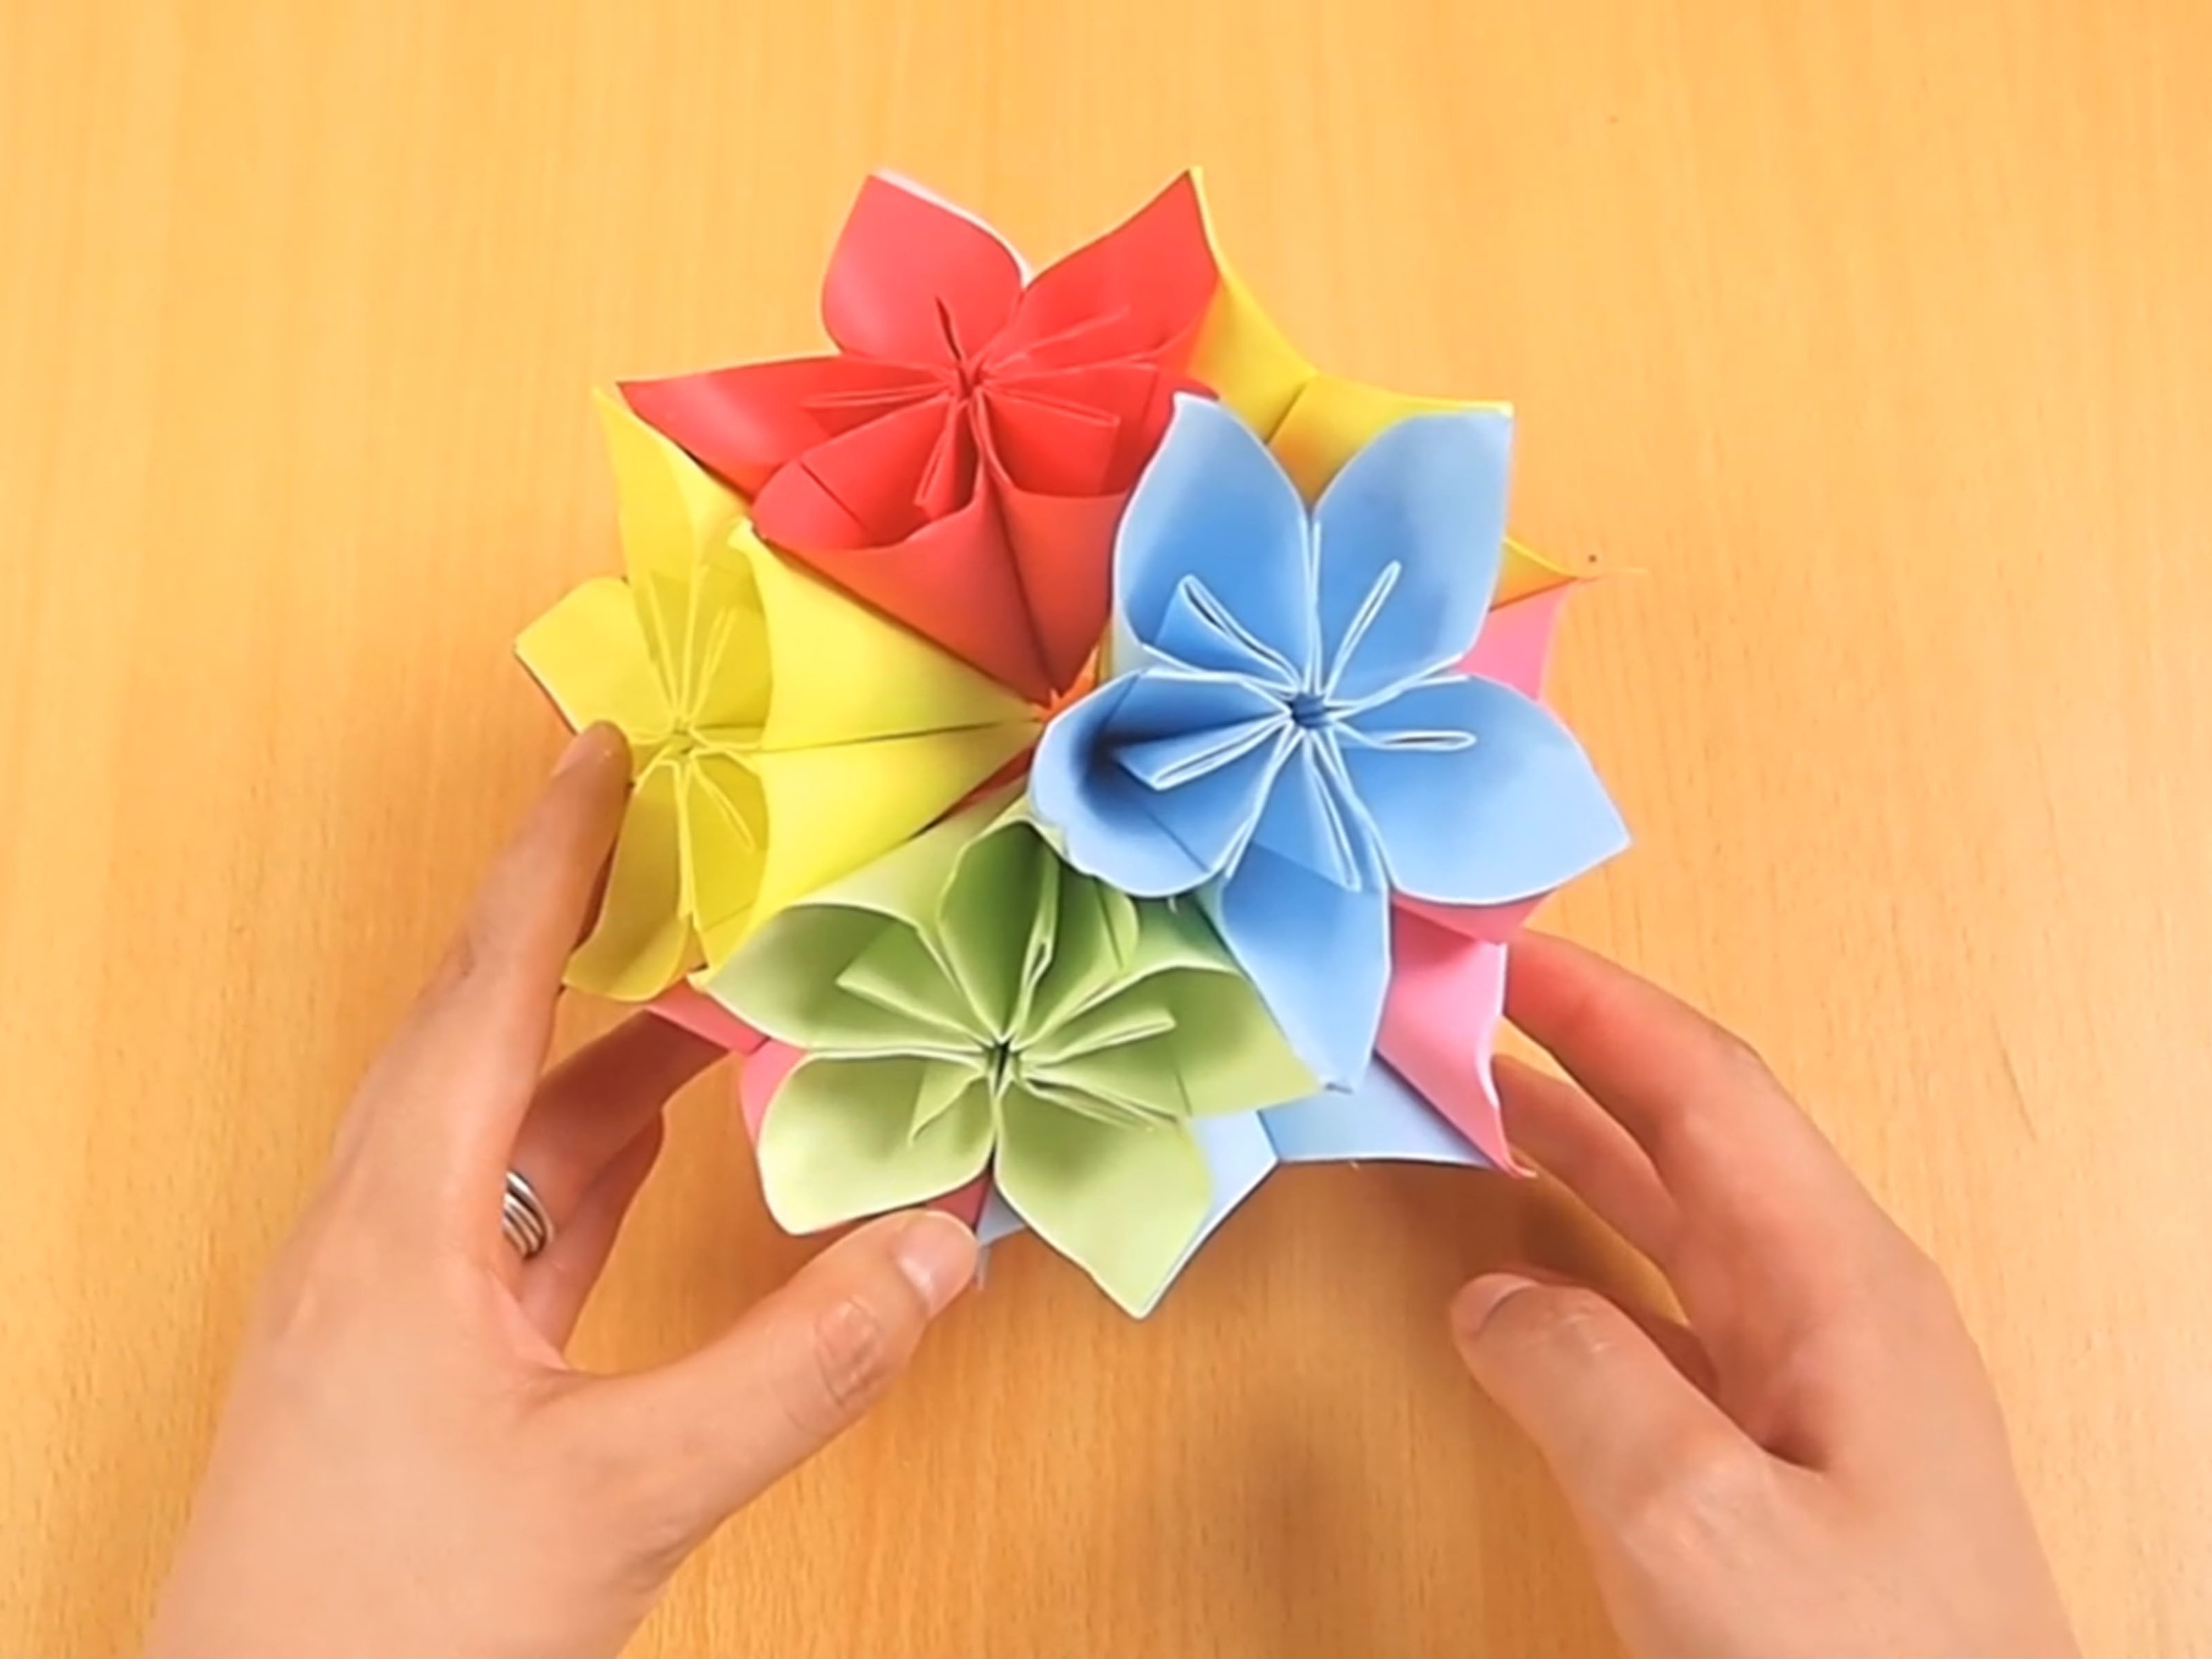 Origami Modular Ball How To Make A Kusudama Ball 12 Steps With Pictures Wikihow